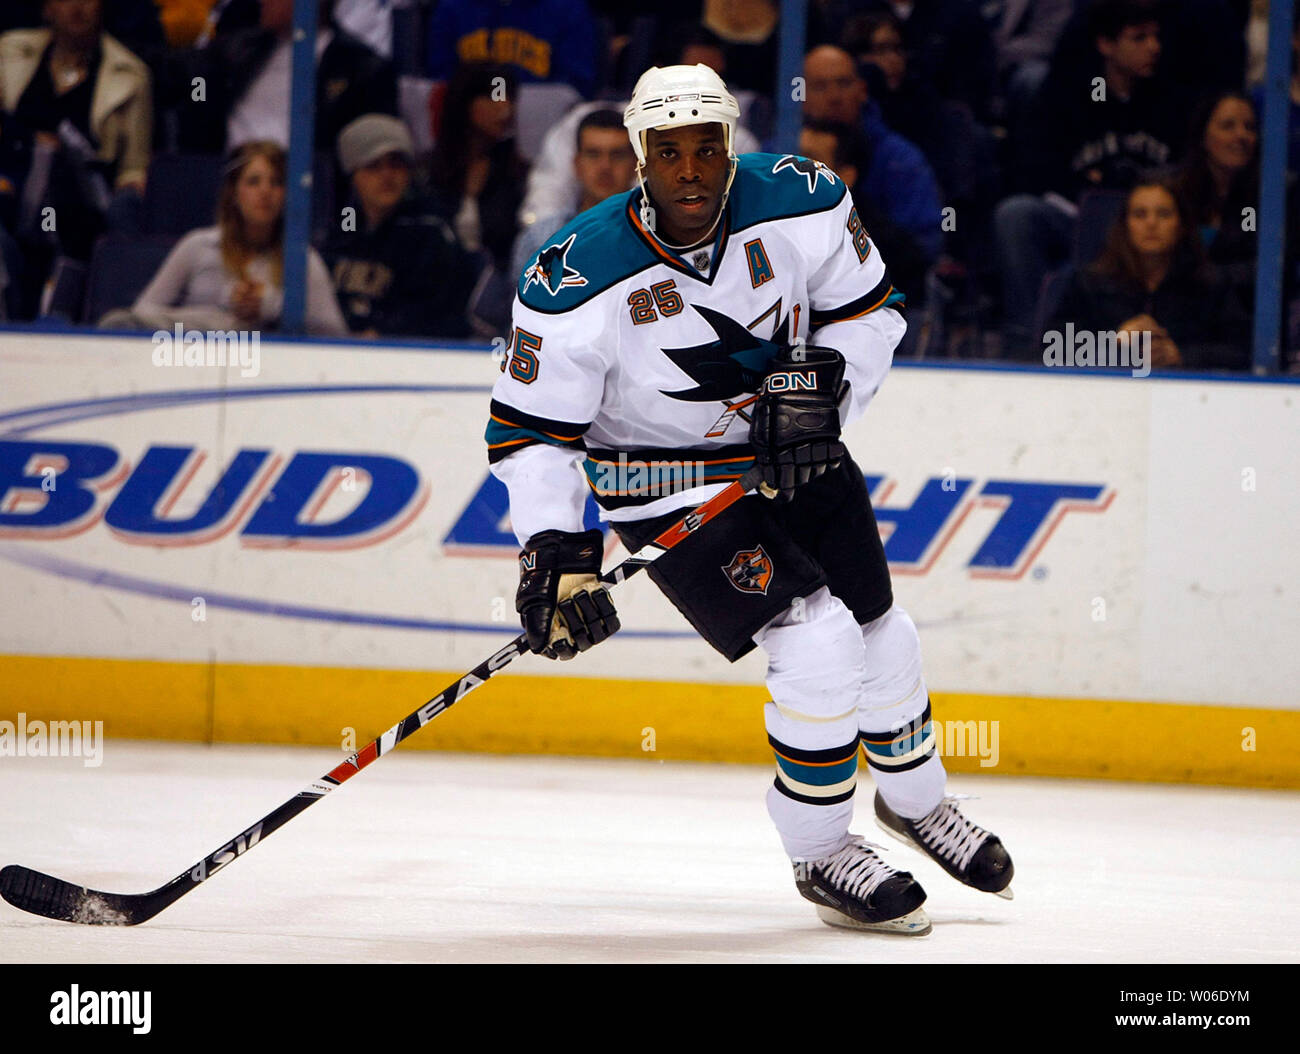 San Jose Sharks Mike Grier chases the puck against the St. Louis Blues in  the first period at the Scottrade Center in St. Louis on December 29, 2007.  San Jose won the